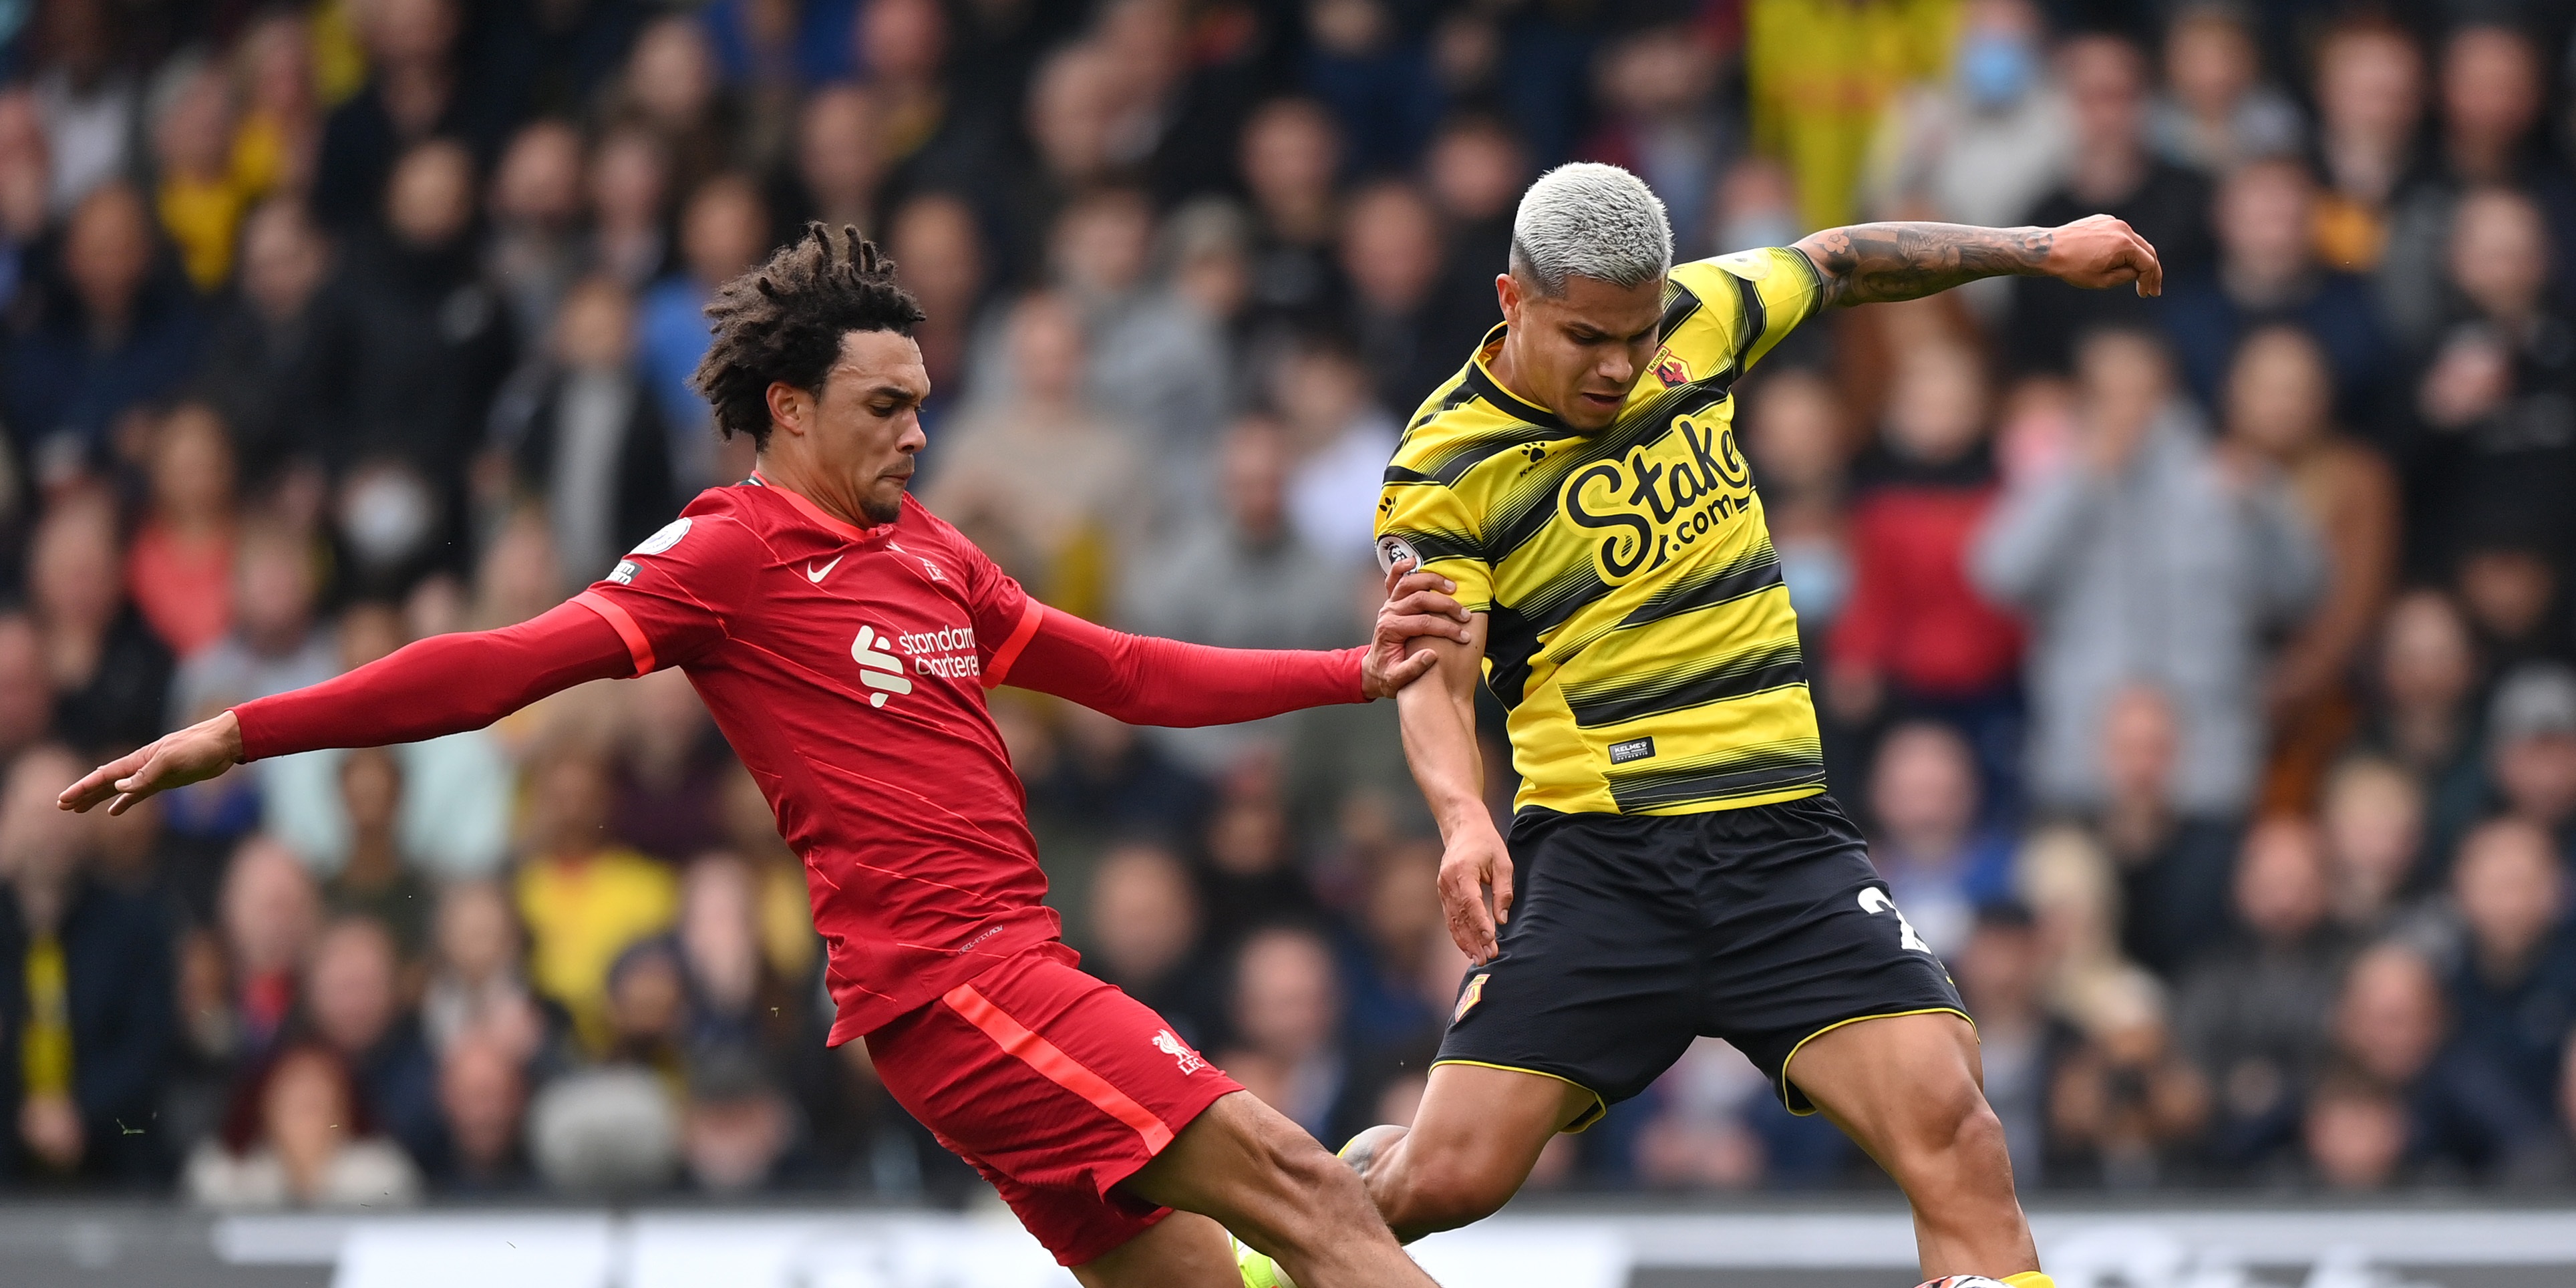 Paul Merson believes Jurgen Klopp will select the player that ‘hardly ever disappoints’ to start at right-back against Watford if Trent Alexander-Arnold isn’t fit in time